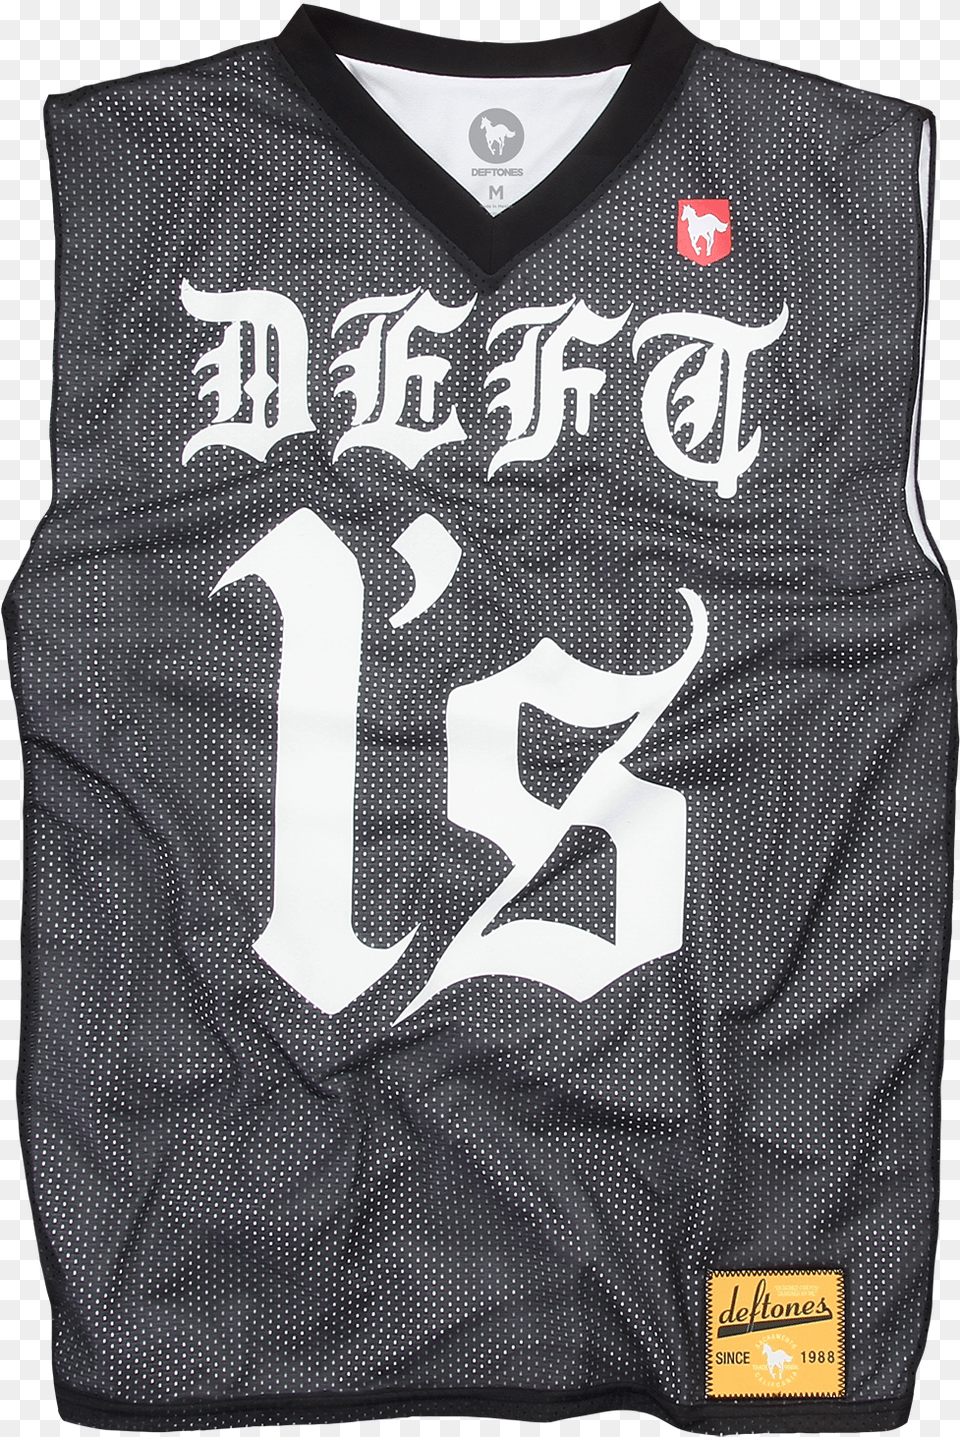 Deftones Basketball Jersey Sweater Vest, Clothing, Shirt, Adult, Male Free Png